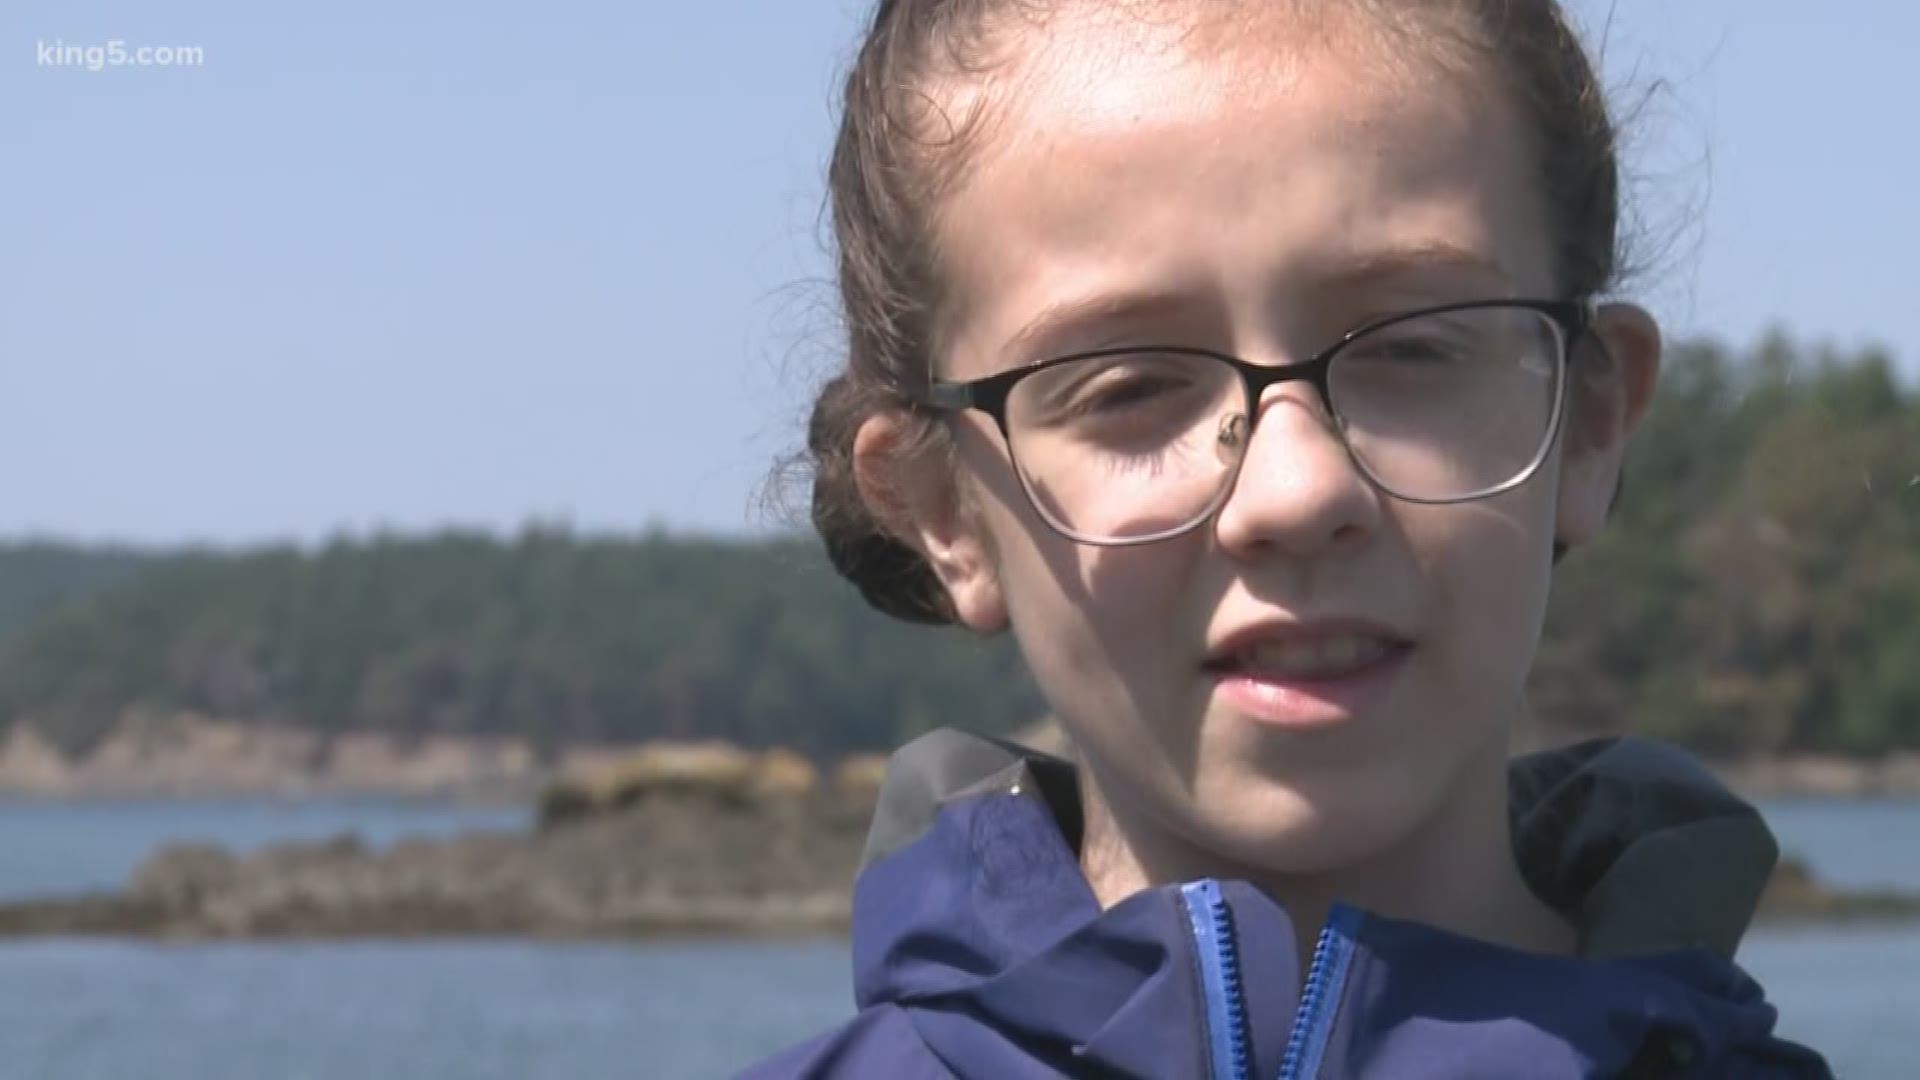 As the endangered Southern Resident orcas struggle to survive, they're drawing experts from all over the state. Now a child is dedicating her life to save them. KING 5's Alison Morrow reports.